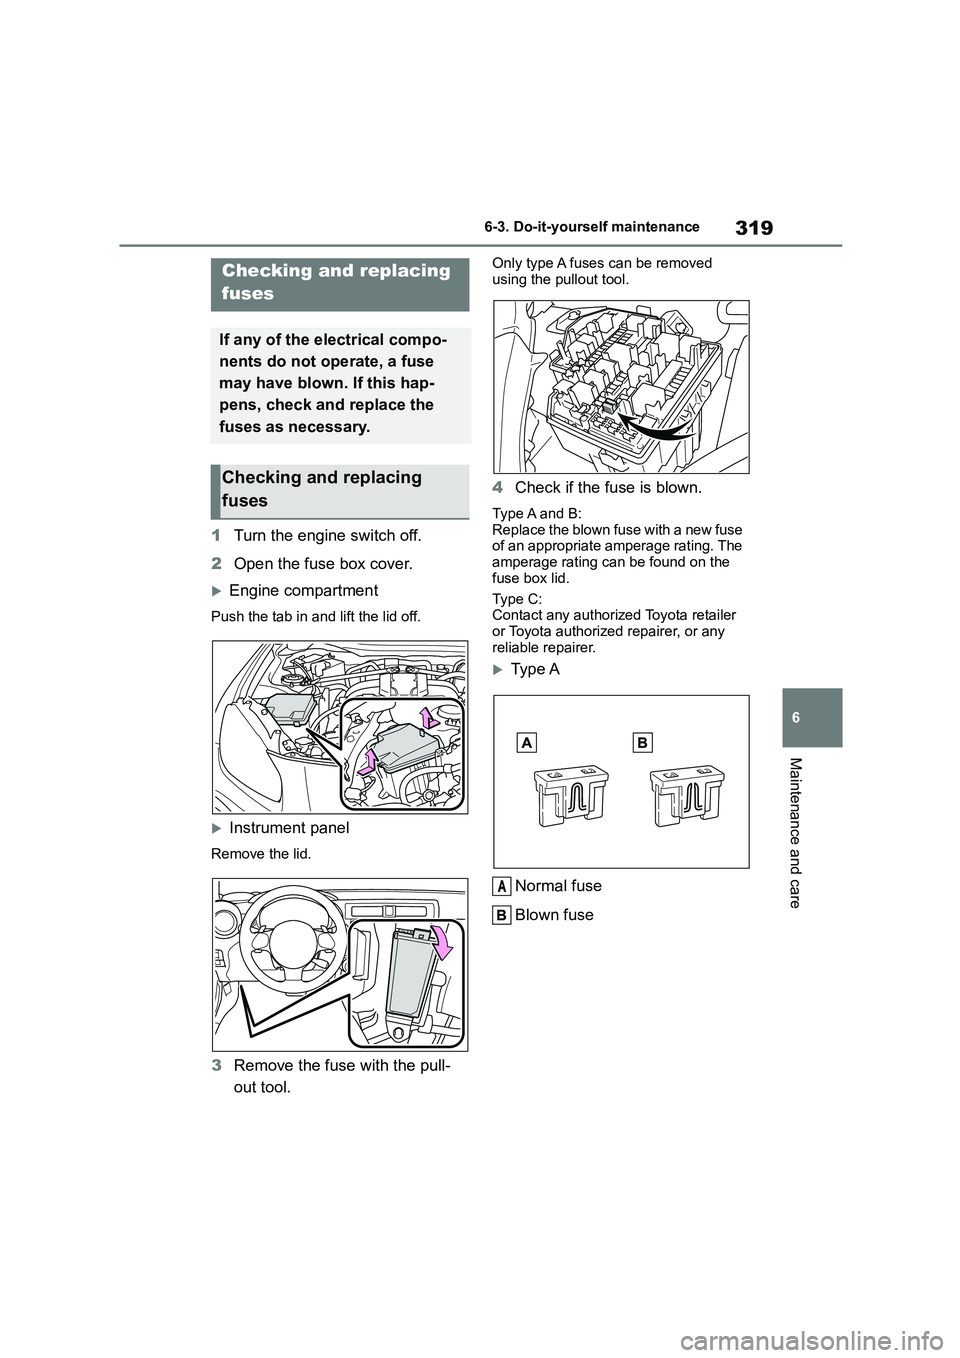 TOYOTA GR86 2022  Owners Manual (in English) 319
6 
6-3. Do-it-yourself maintenance
Maintenance and care
1 Turn the engine switch off. 
2 Open the fuse box cover.
Engine compartment
Push the tab in and lift the lid off.
Instrument panel
Re